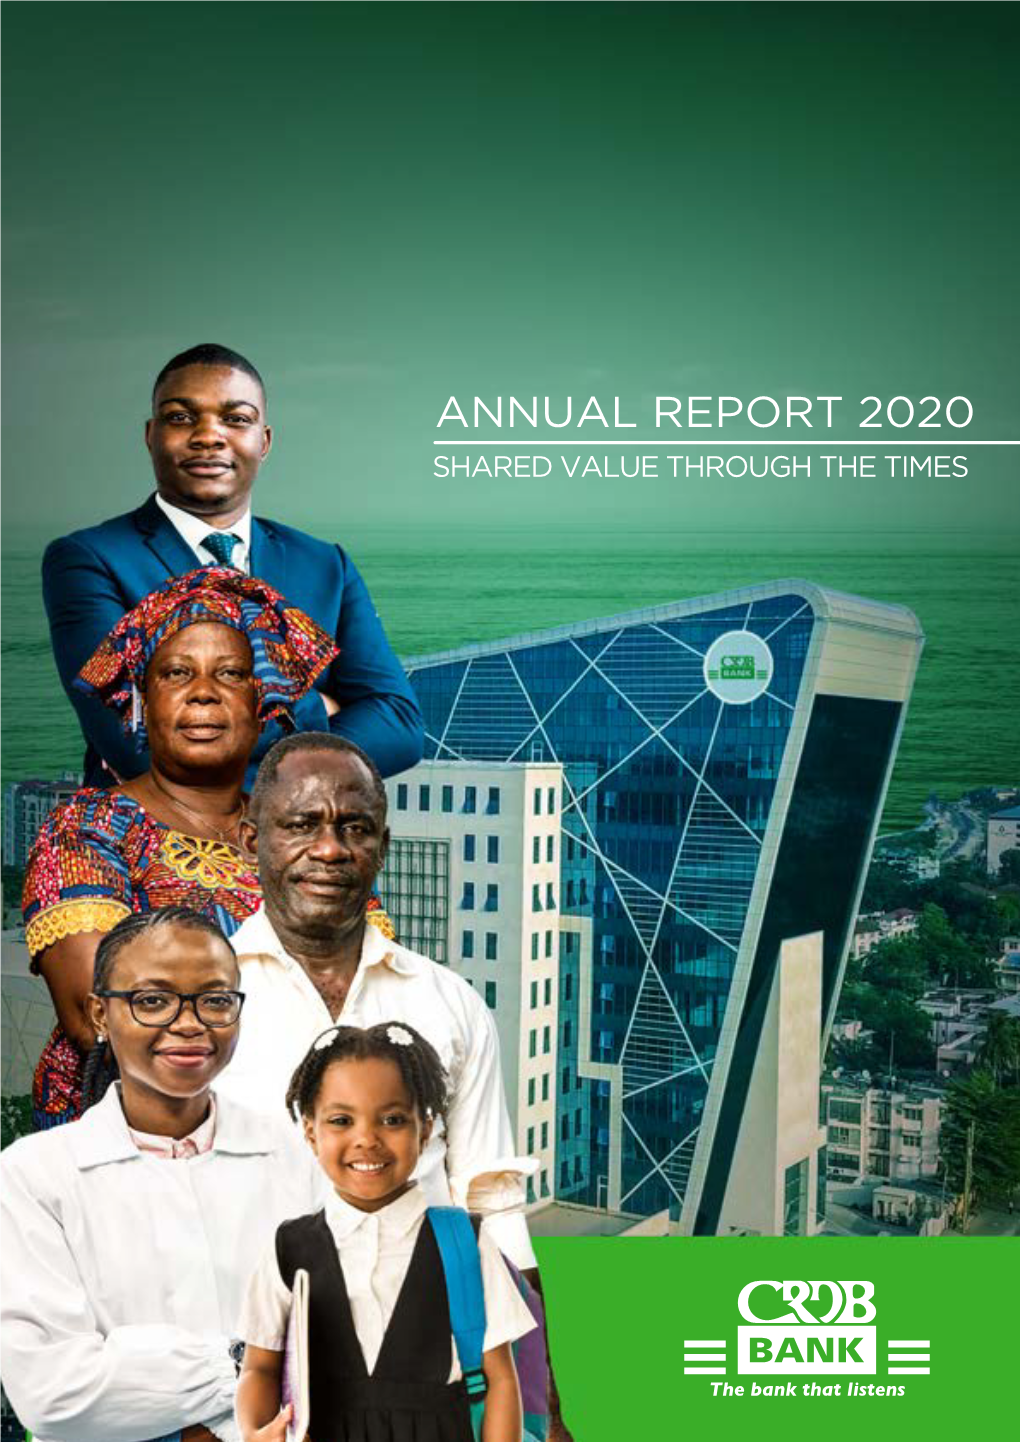 Annual Report 2020 Shared Value Through the Times Contents